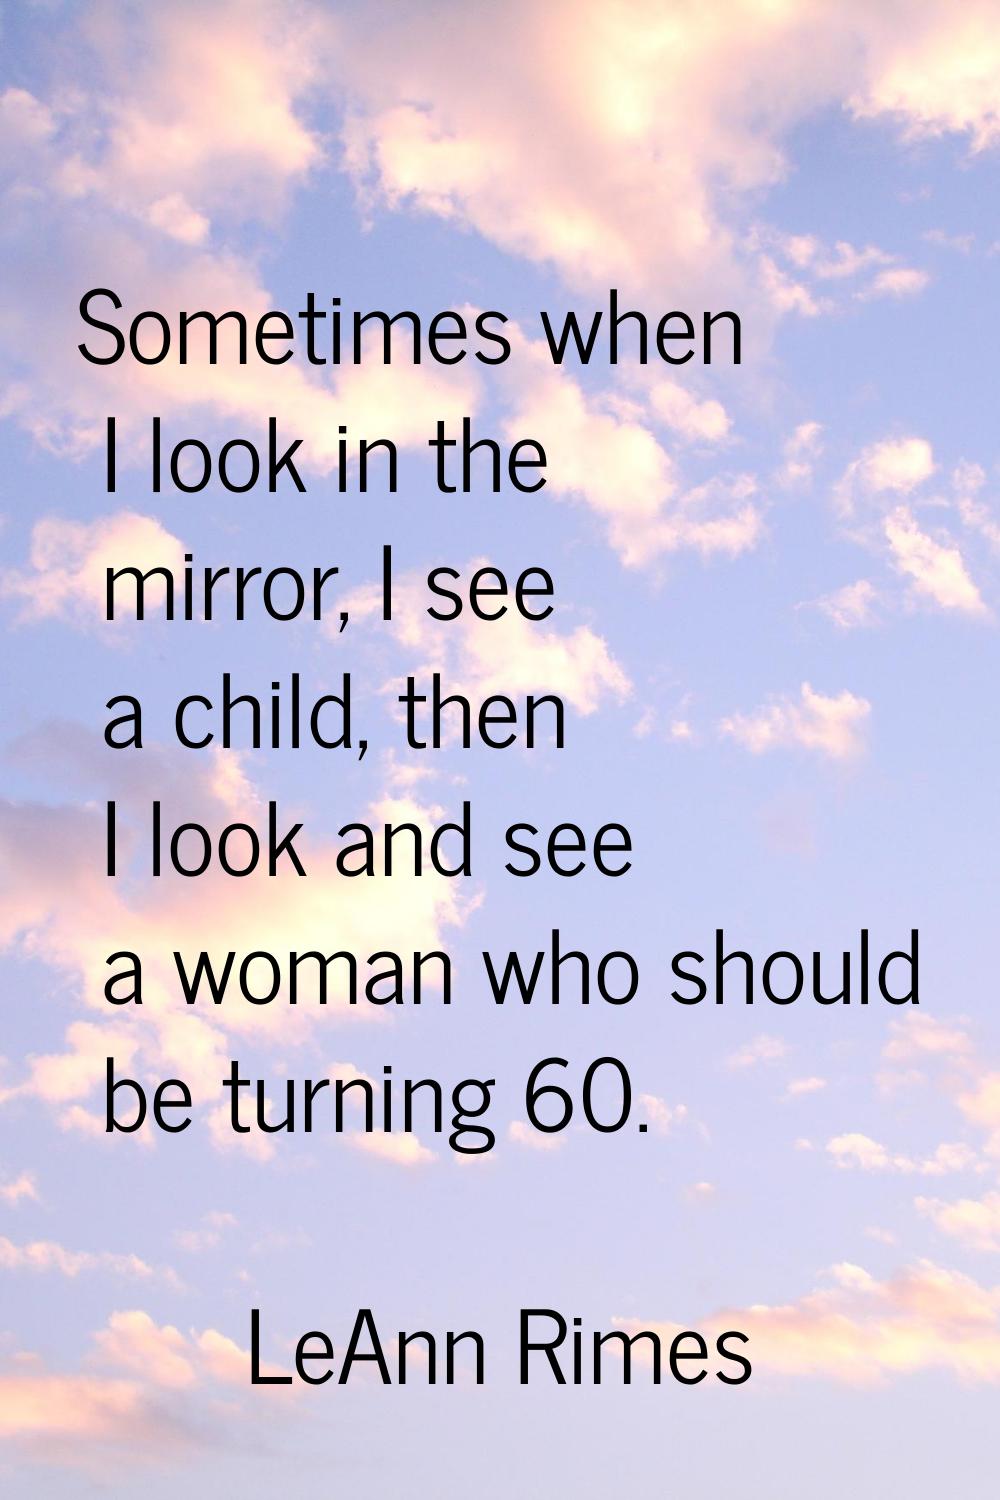 Sometimes when I look in the mirror, I see a child, then I look and see a woman who should be turni